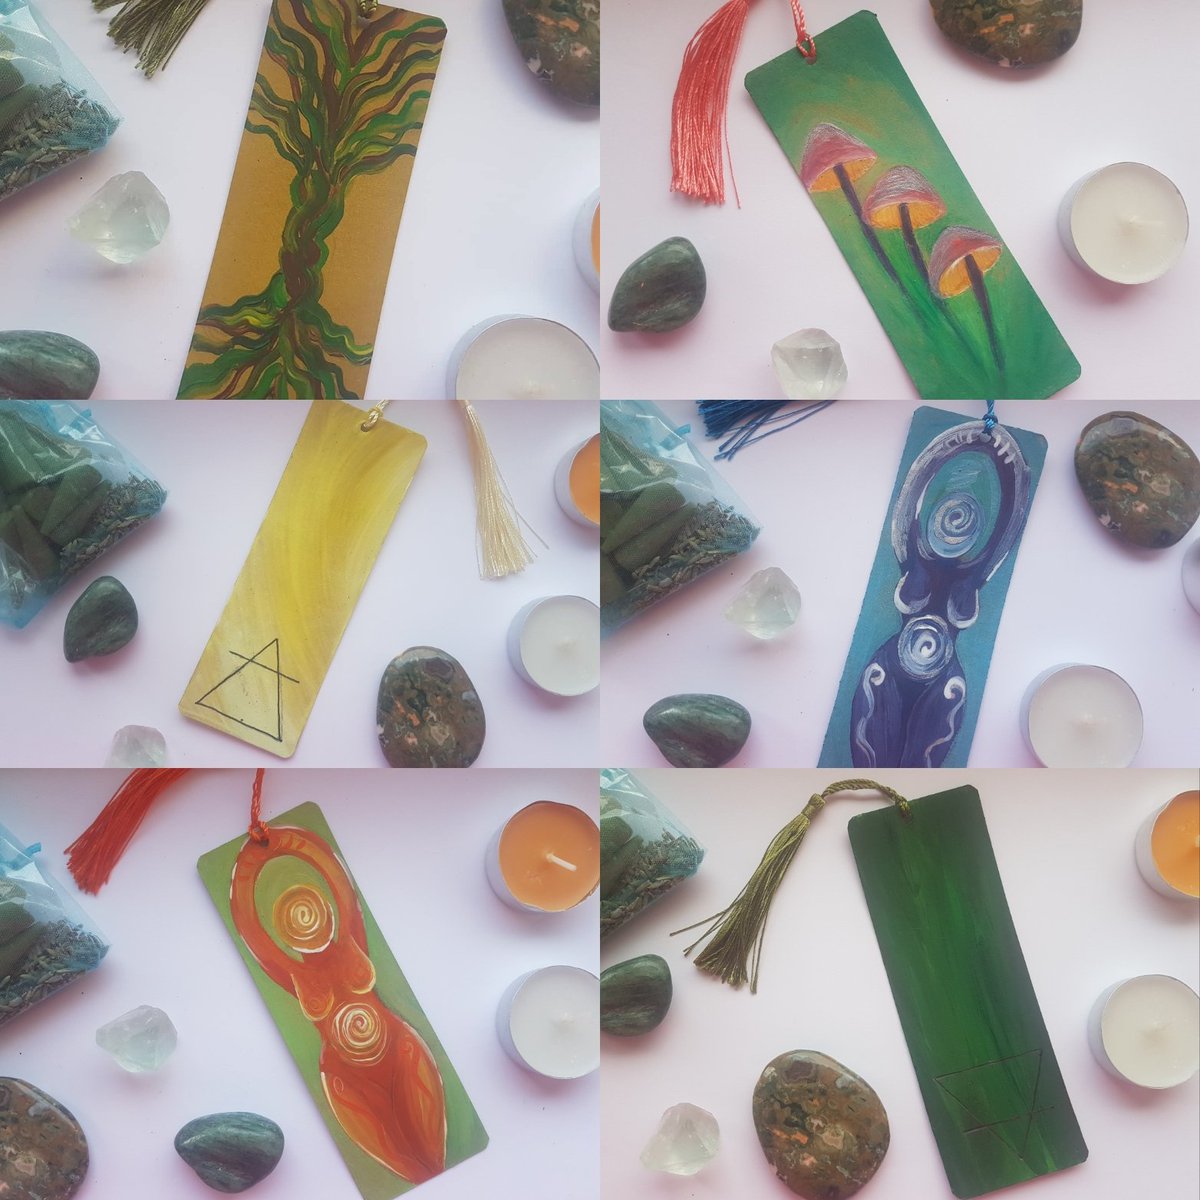 I'll go first! Hi! I'm a flora, fauna, celestial & mystic artist in Bedfordshire UK. Handpainted, made bookmarks, charms, wall art, portraits and more! ready to order items in store now. open for commissions of custom pieces.  https://etsy.me/3dJhAUy 